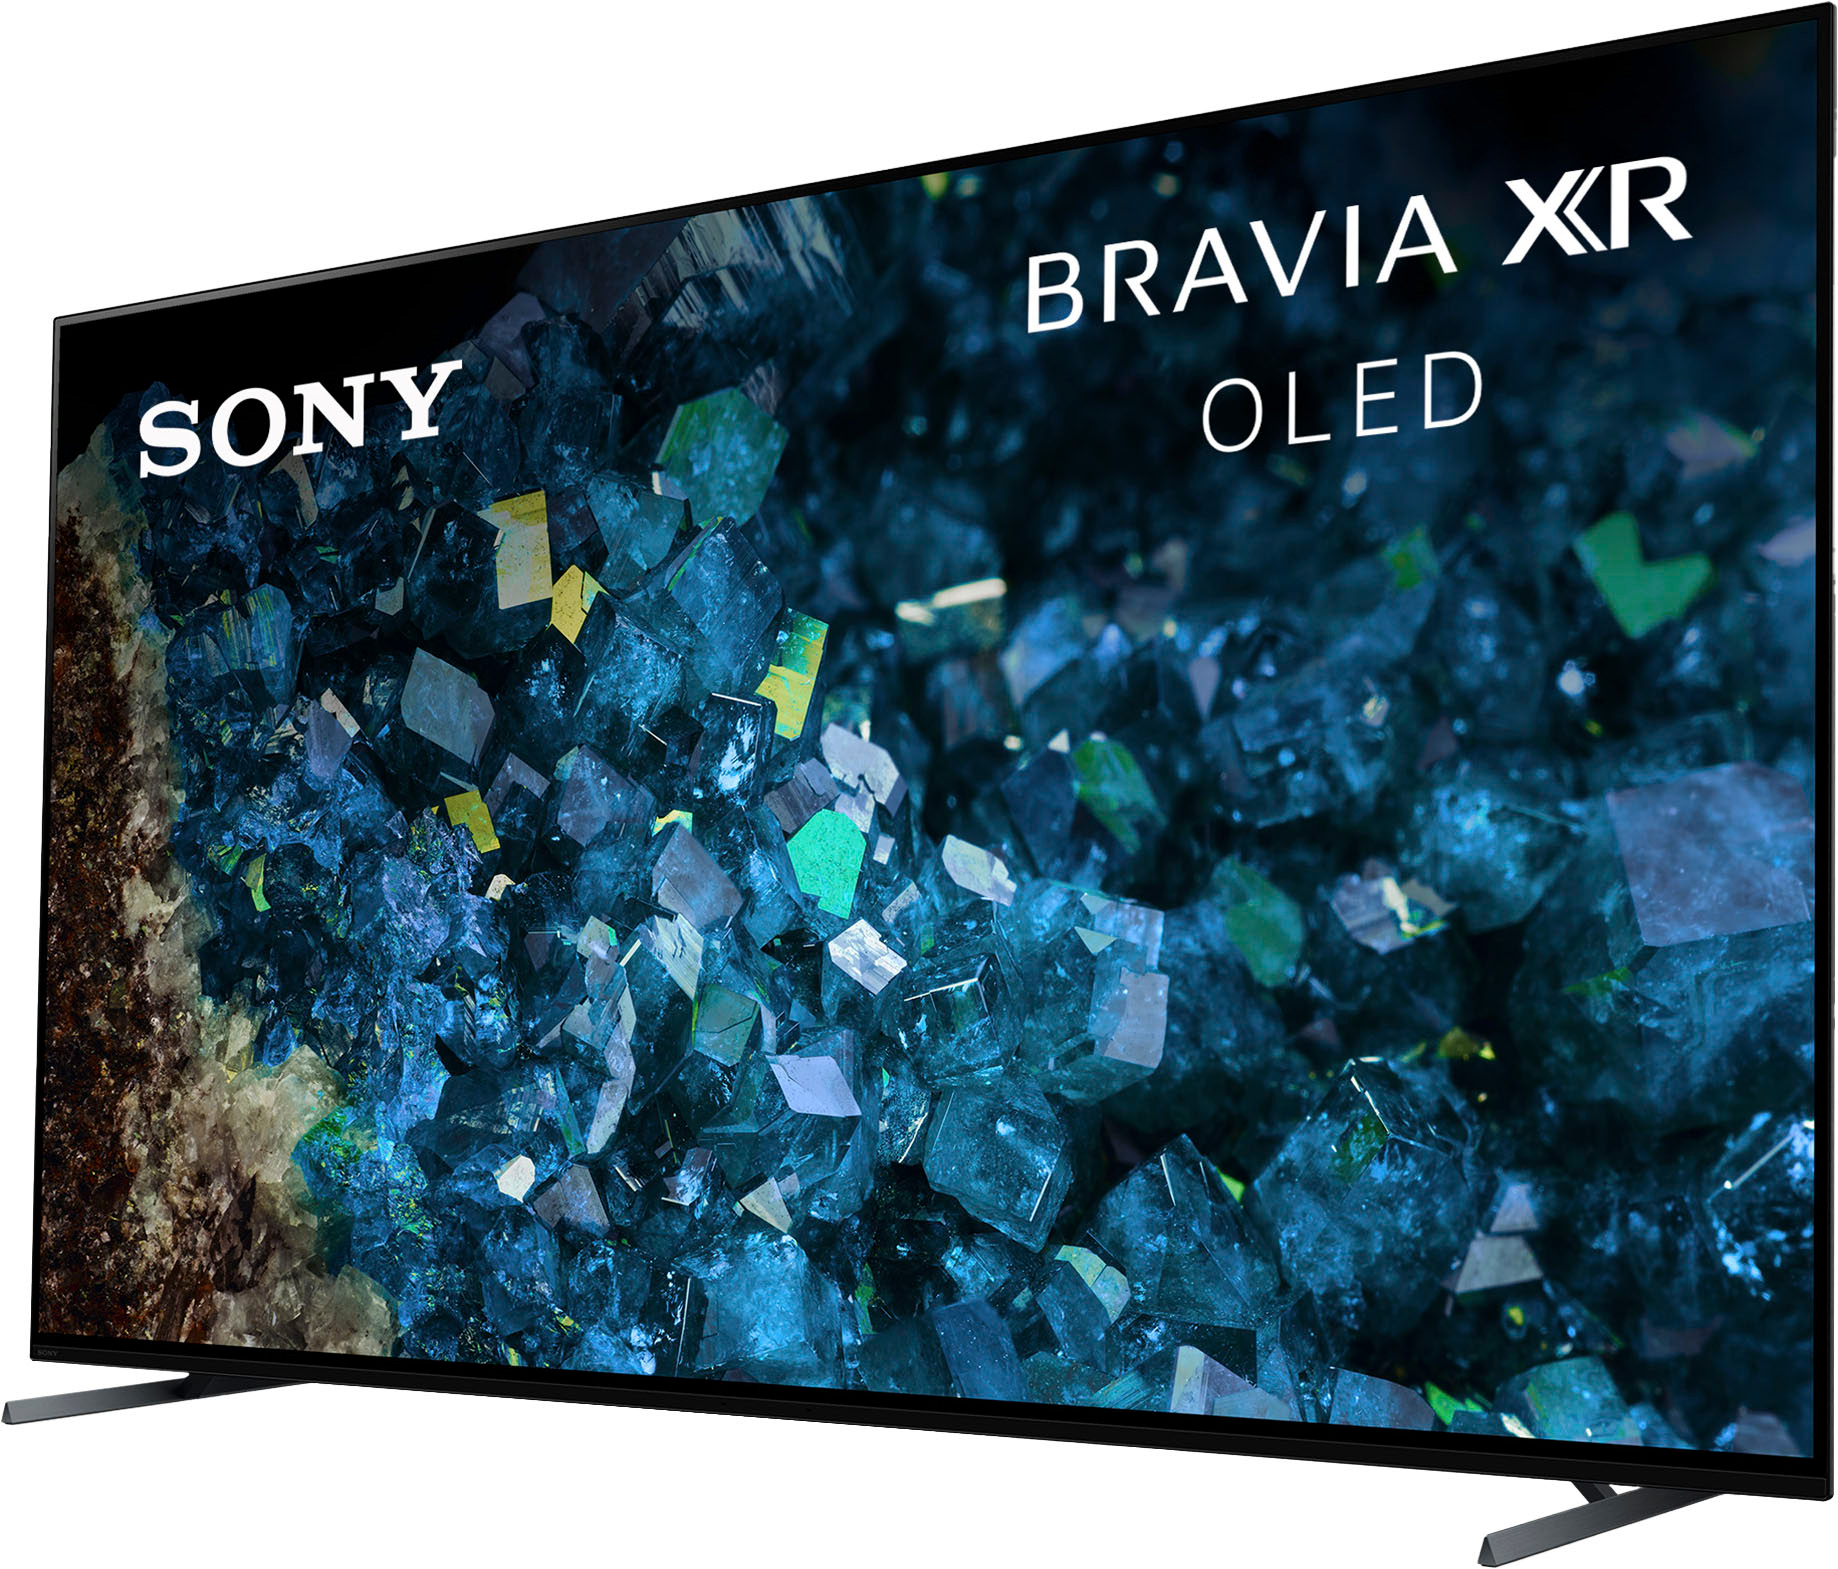 Angle View: Sony - 55" class BRAVIA XR A80L OLED 4K HDR Google TV